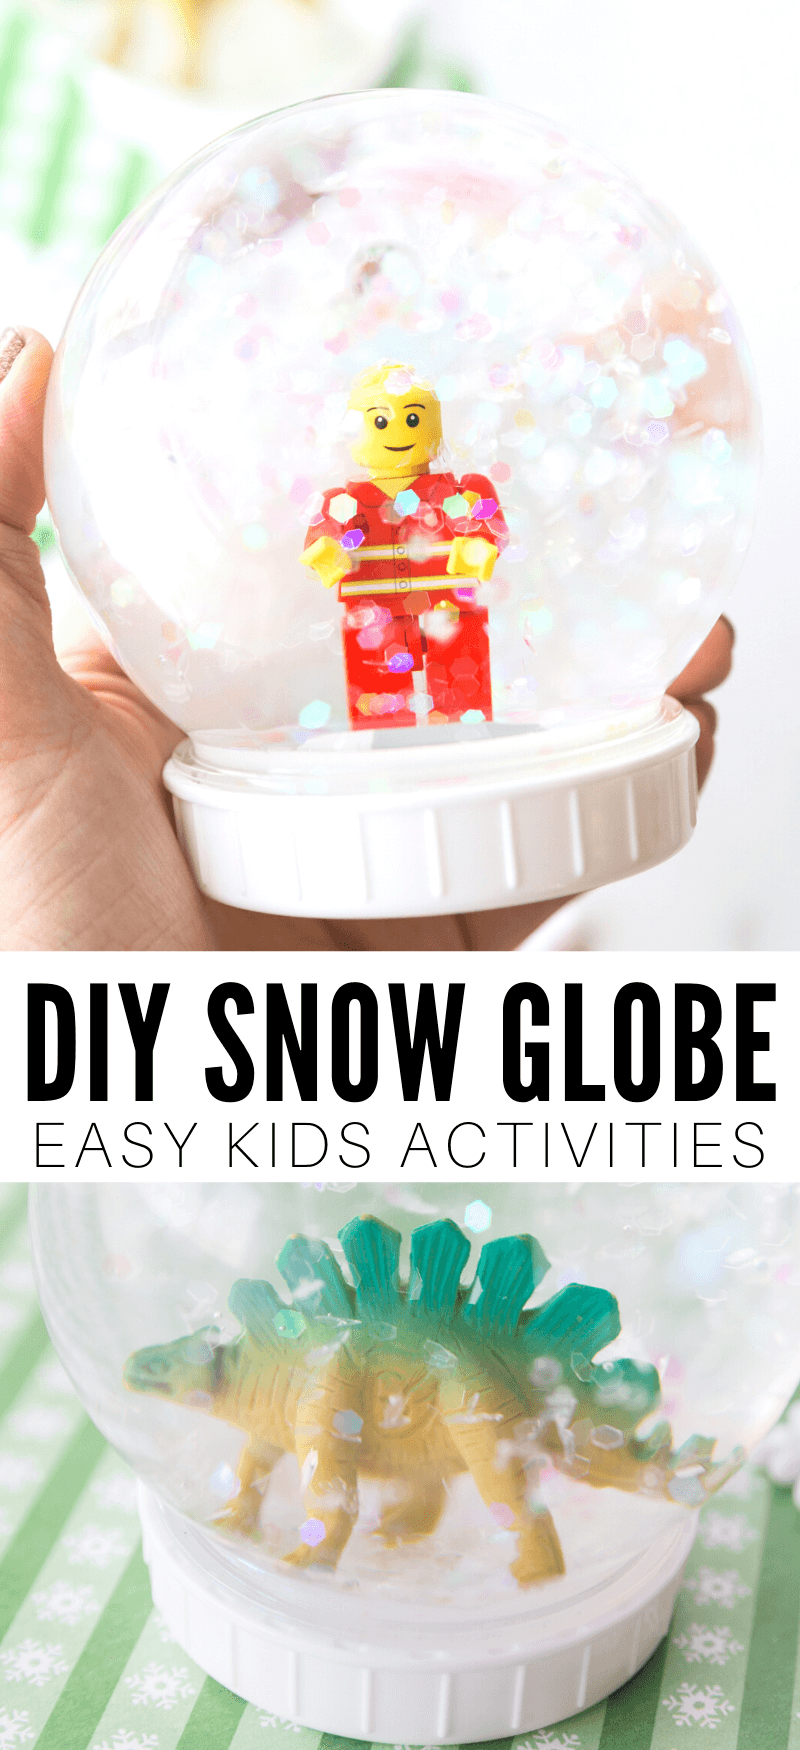 13 diy projects for kids ideas